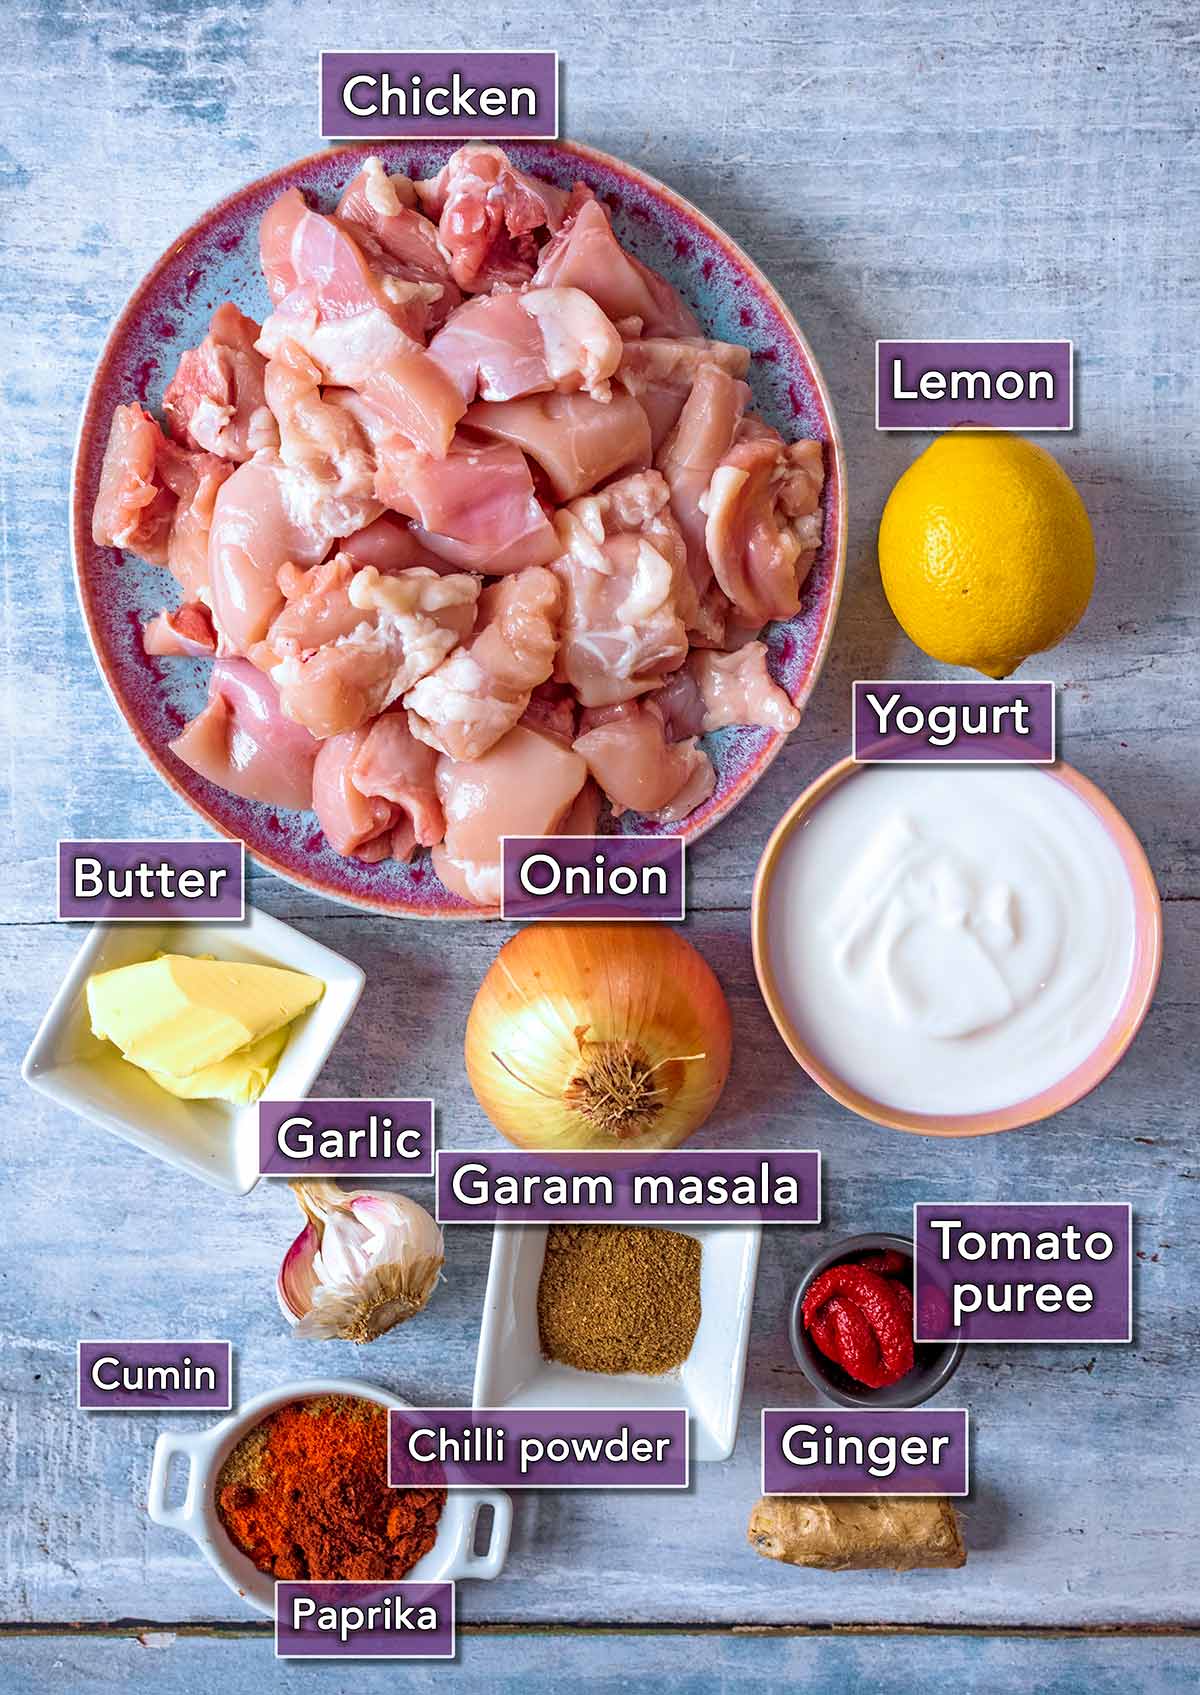 All the ingredients needed to make this recipe with text overlay labels.